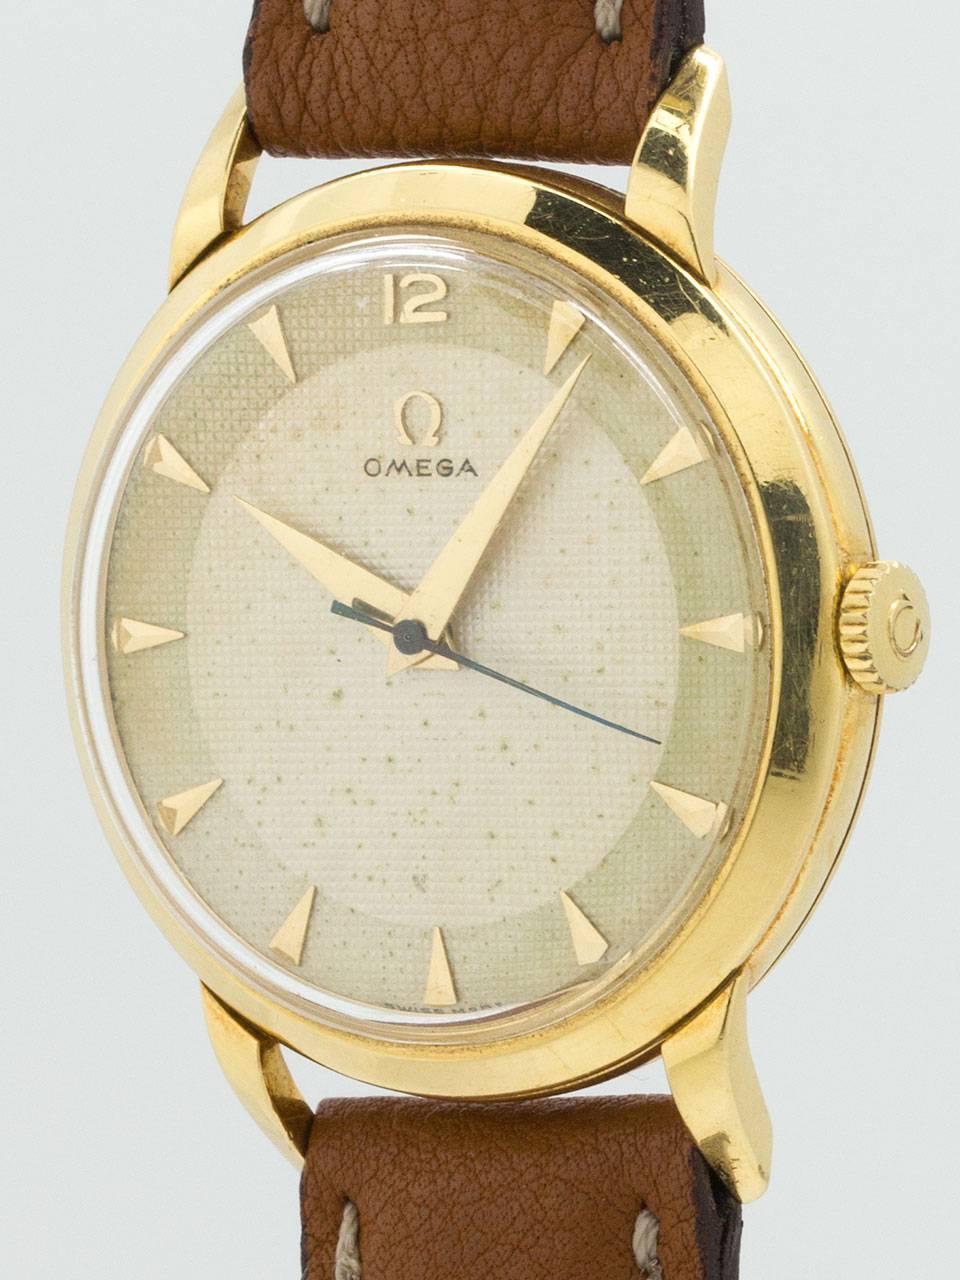 Omega 18K Yellow Gold circa 1950s. Large for the era, 34 x 43mm heavy snap back case with acrylic crystal and beautiful original 2 tone textured dial with raised triangular indexes and tapered sword style hands. Powered by 17 jewel manual wind